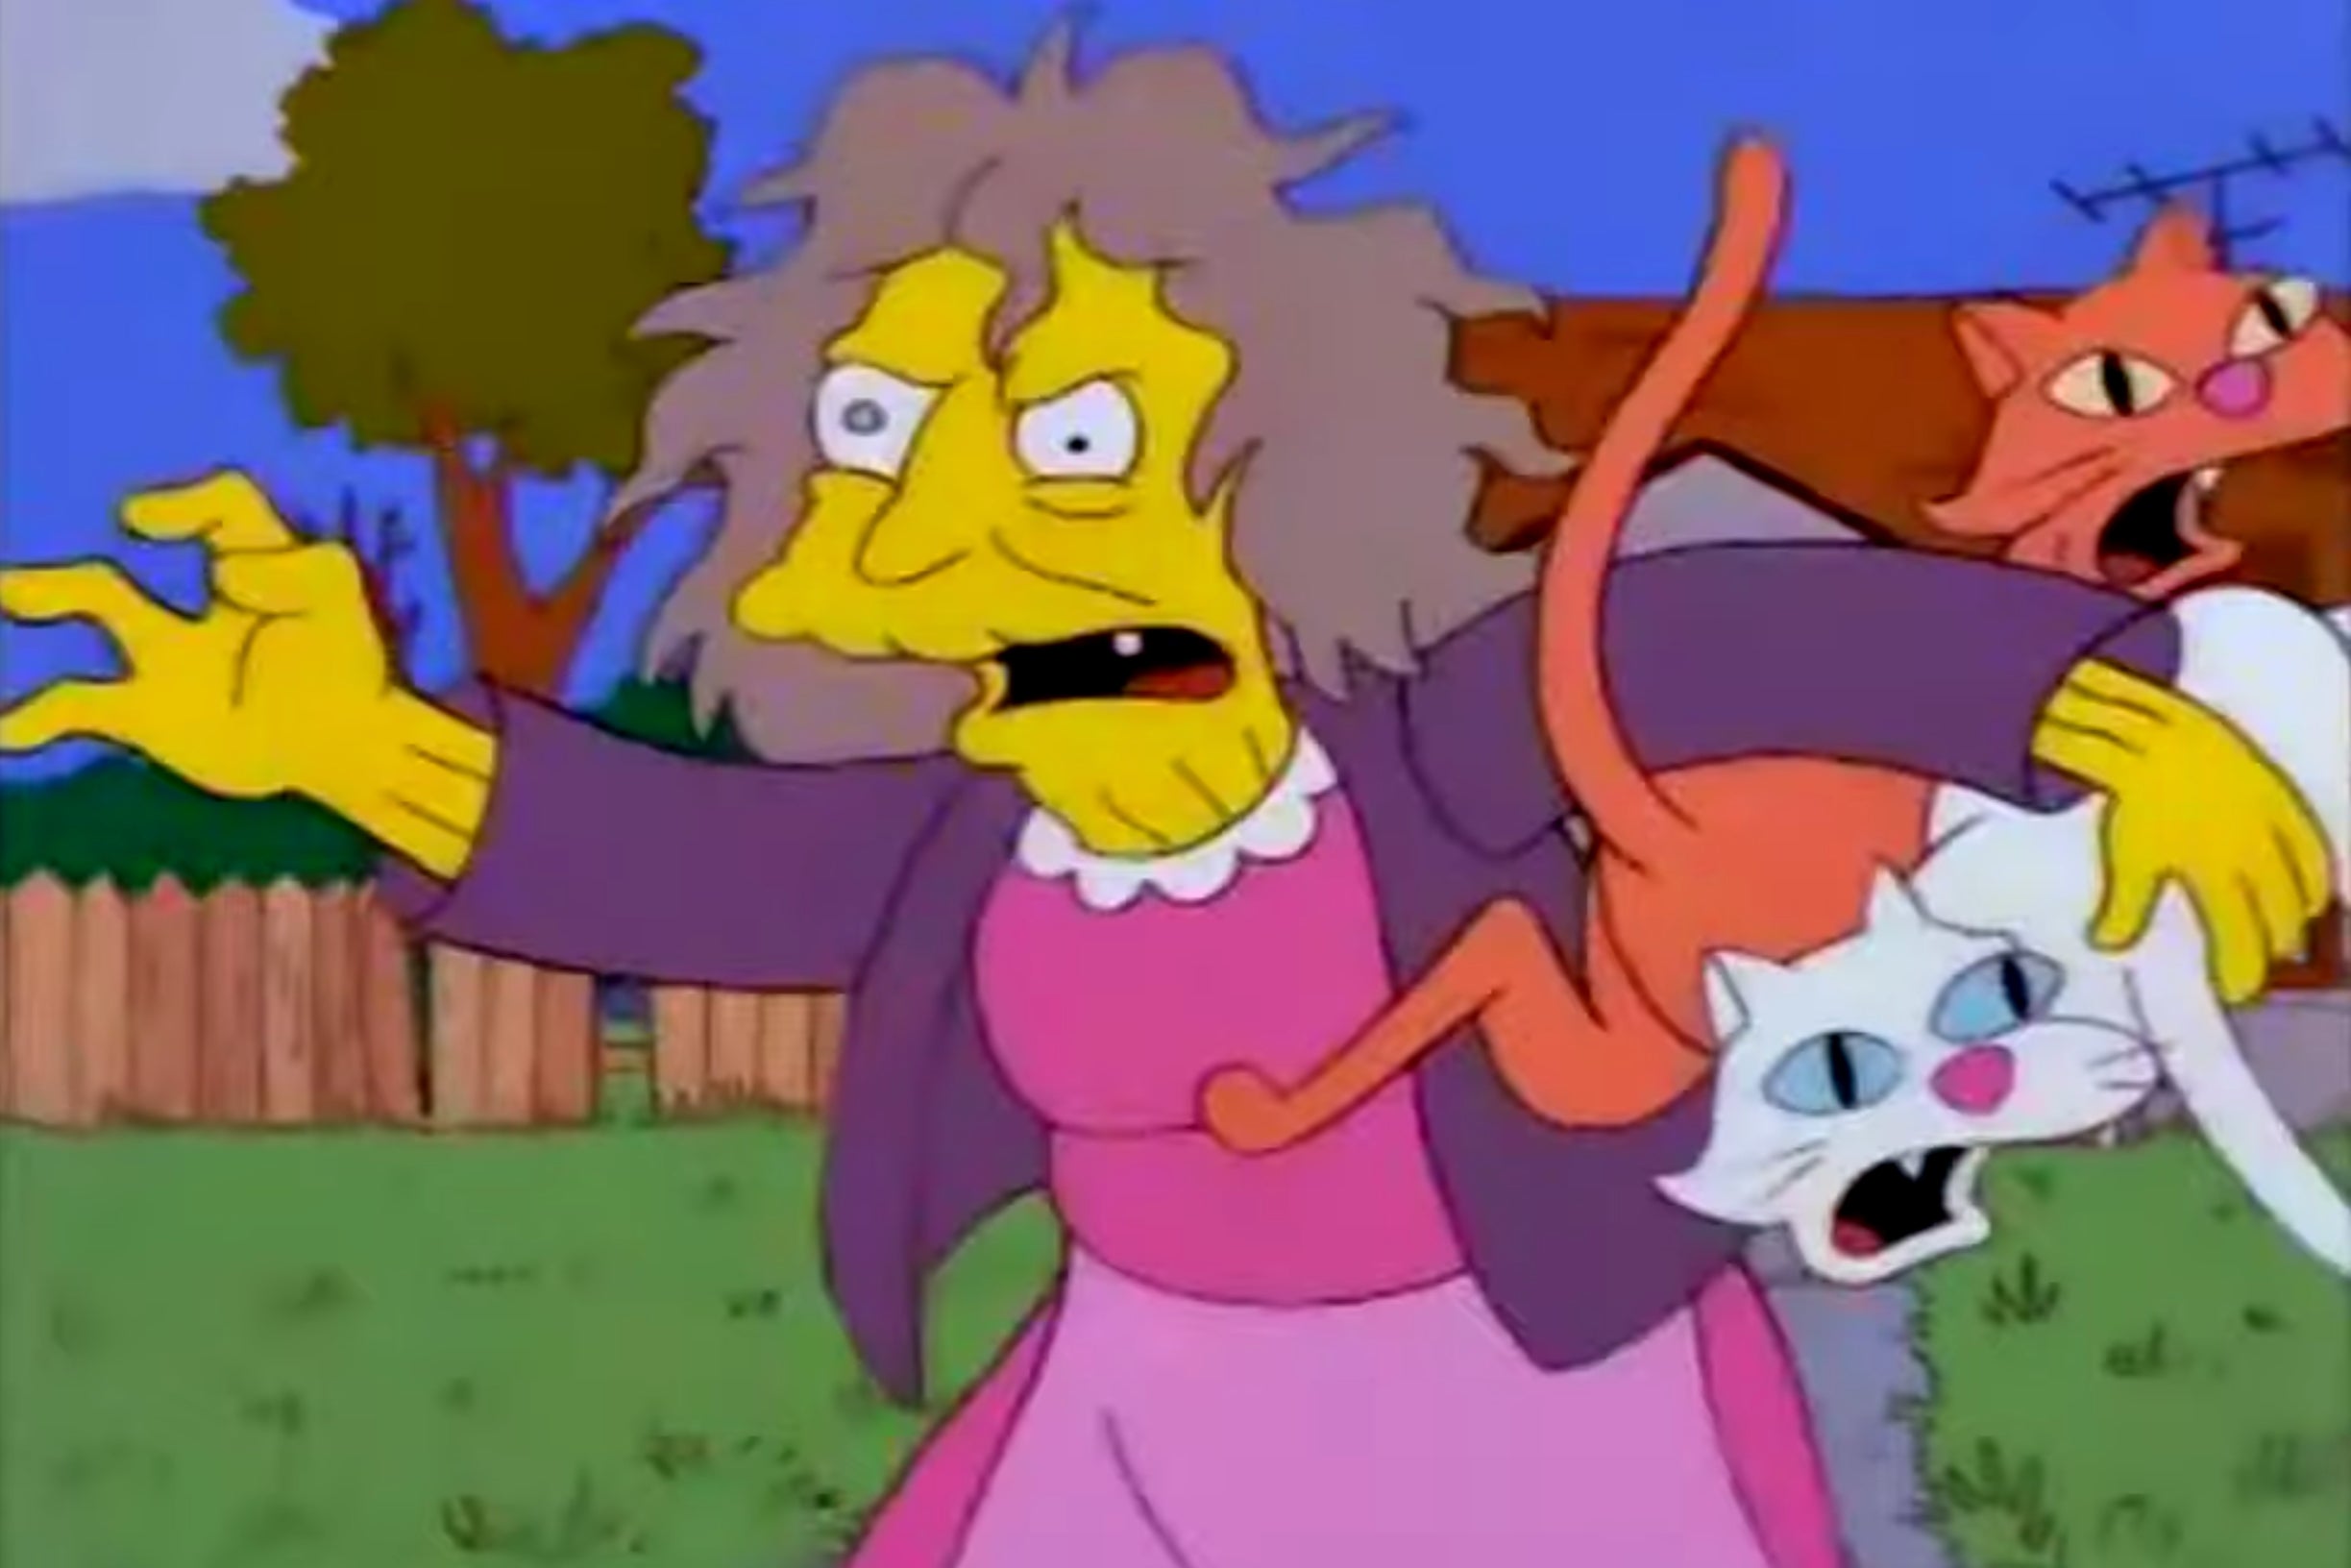 The ‘crazy cat lady’ trope, as seen here in ‘The Simpsons’, is a pervasive one both socially and culturally